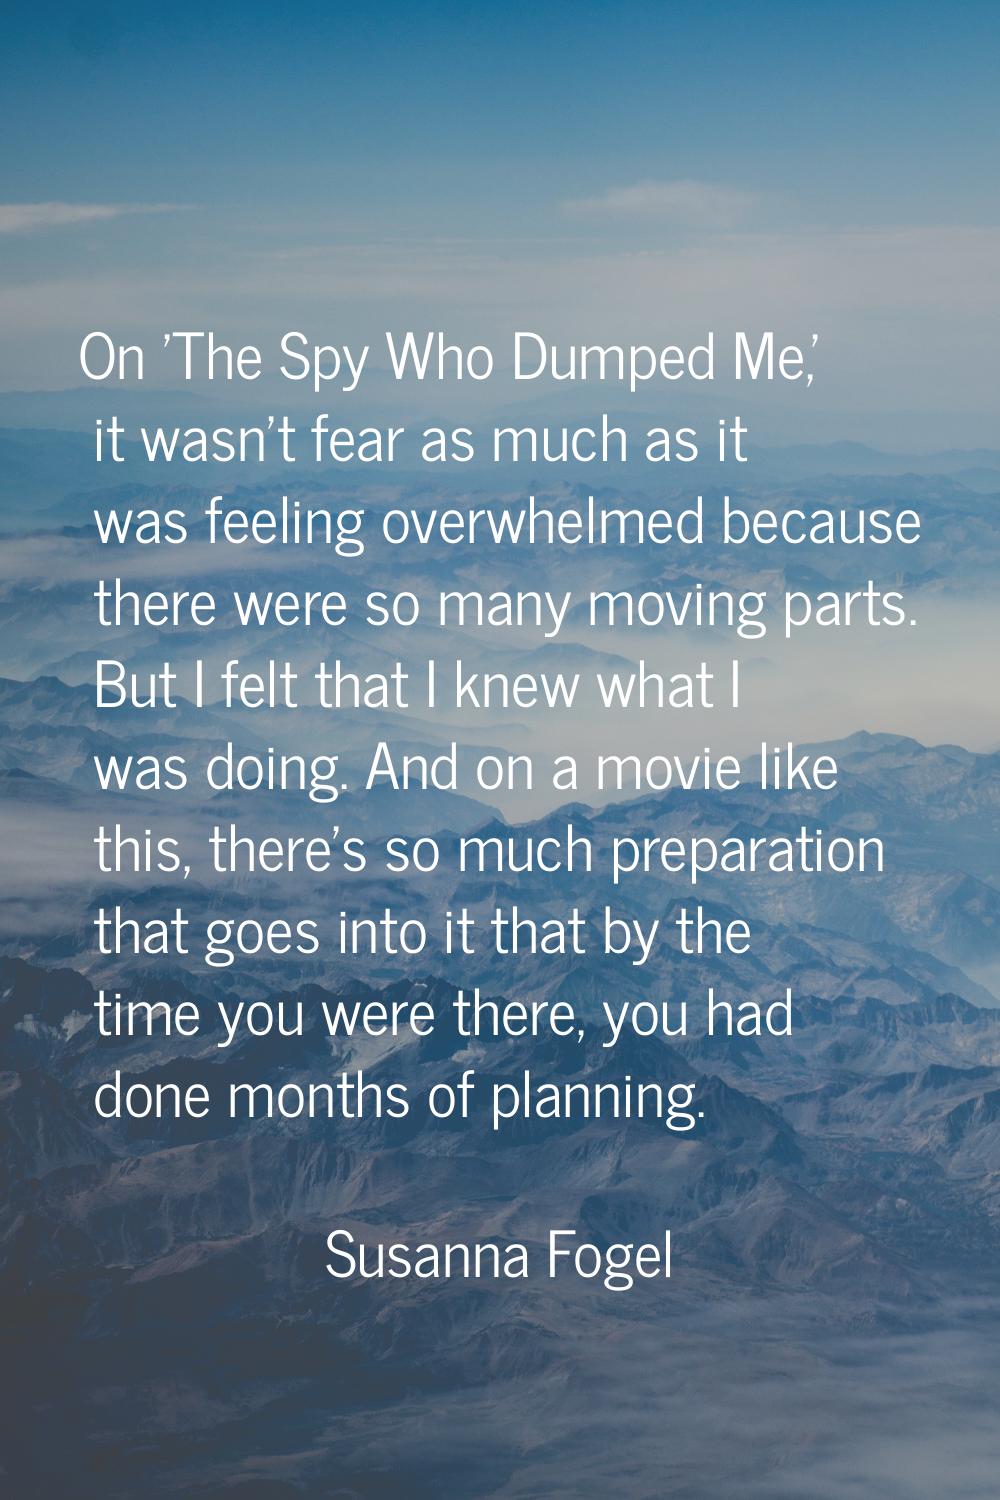 On 'The Spy Who Dumped Me,' it wasn't fear as much as it was feeling overwhelmed because there were